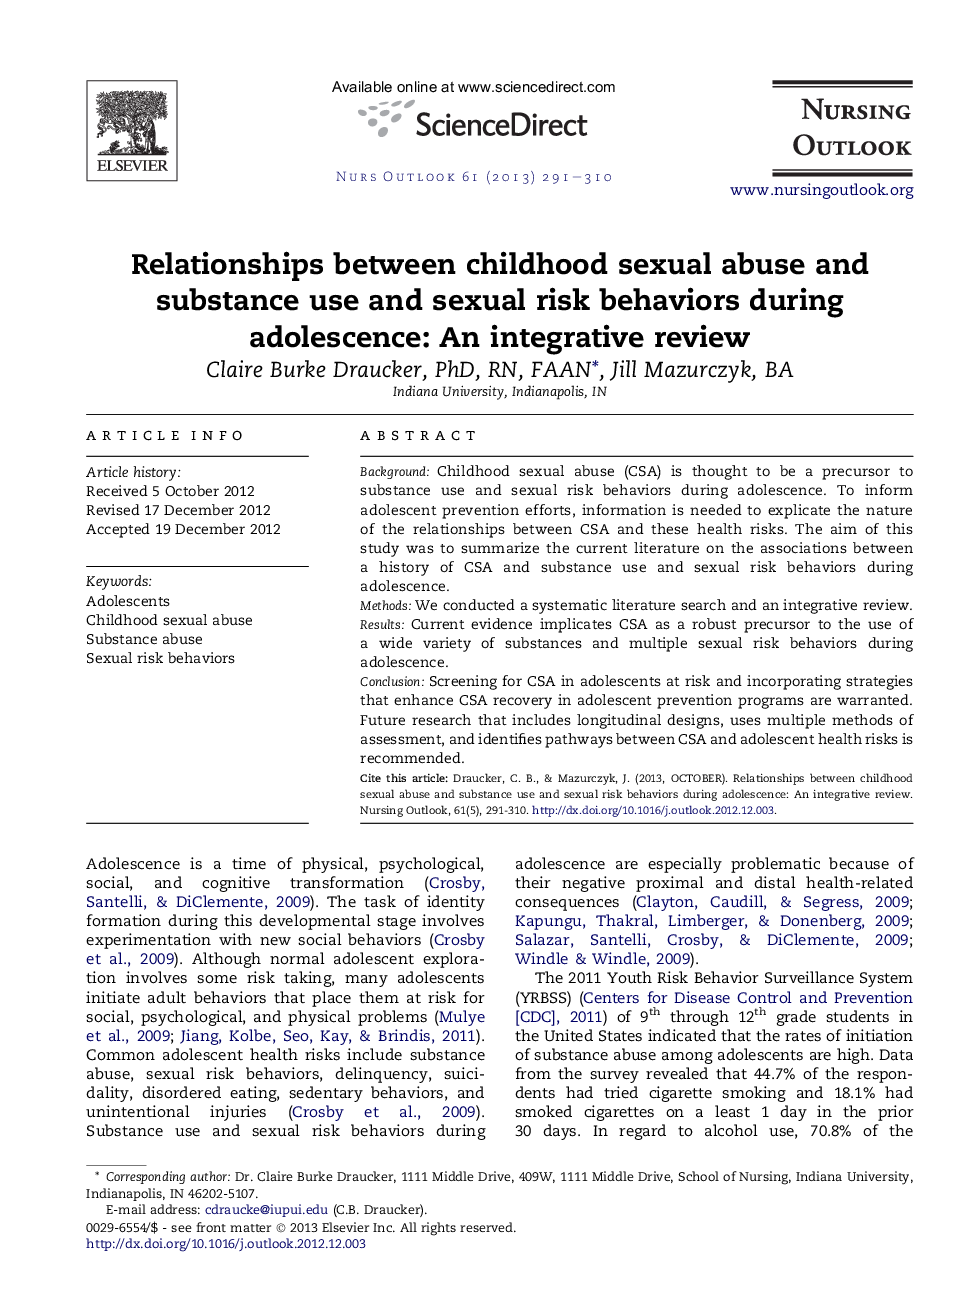 Relationships between childhood sexual abuse and substance use and sexual risk behaviors during adolescence: An integrative review